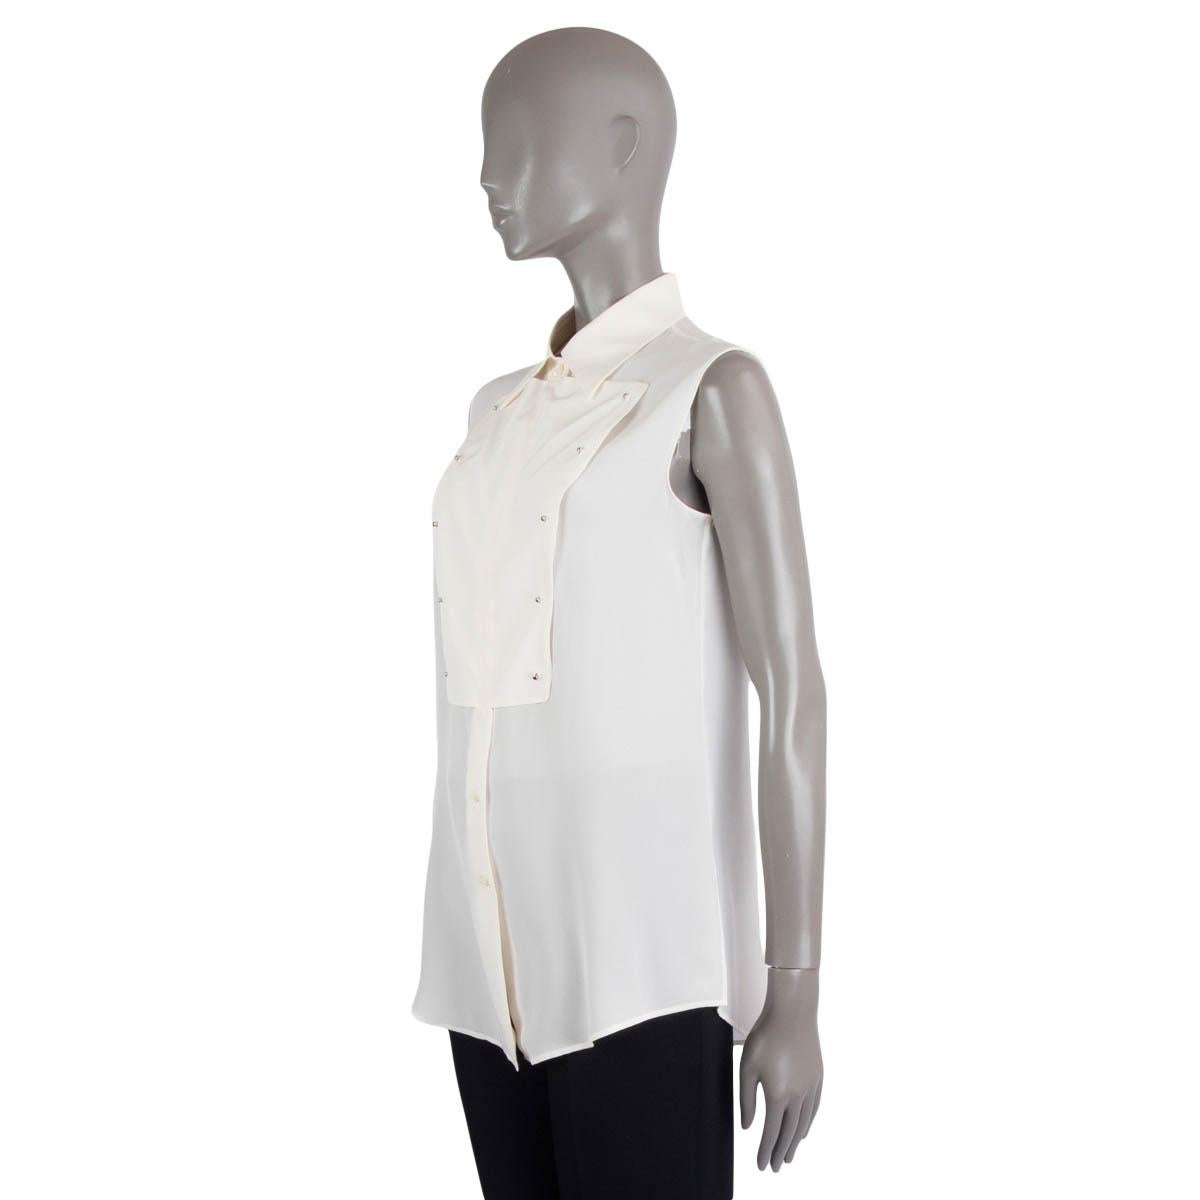 PRADA ivory silk 2016 BIB FRONT SLEEVELESS CREPE Blouse Shirt S In Excellent Condition For Sale In Zürich, CH